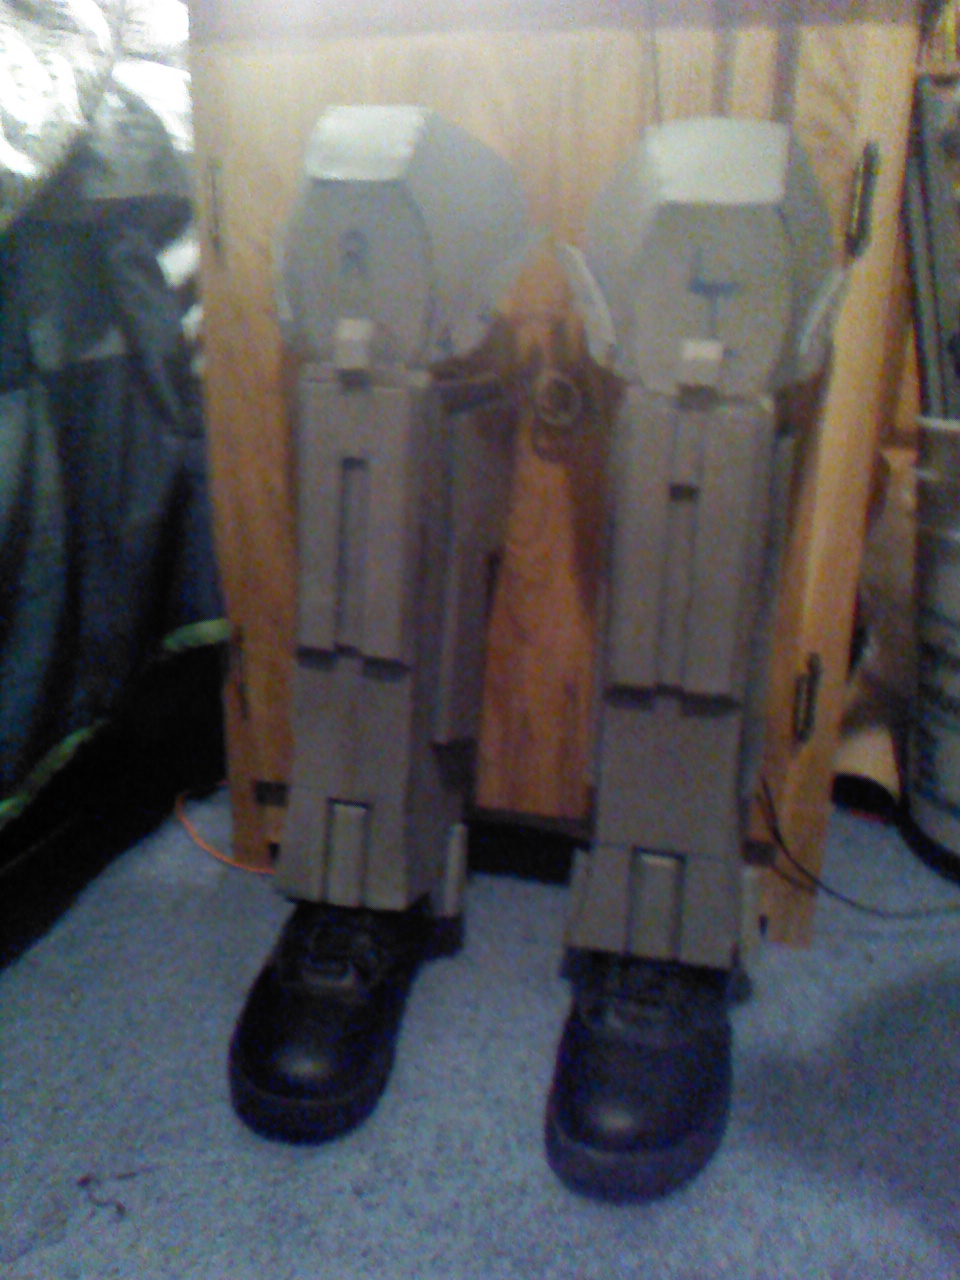 Shin Guards, fixed. (WIP)

I cut them at the bottom, because they where a bit too long.